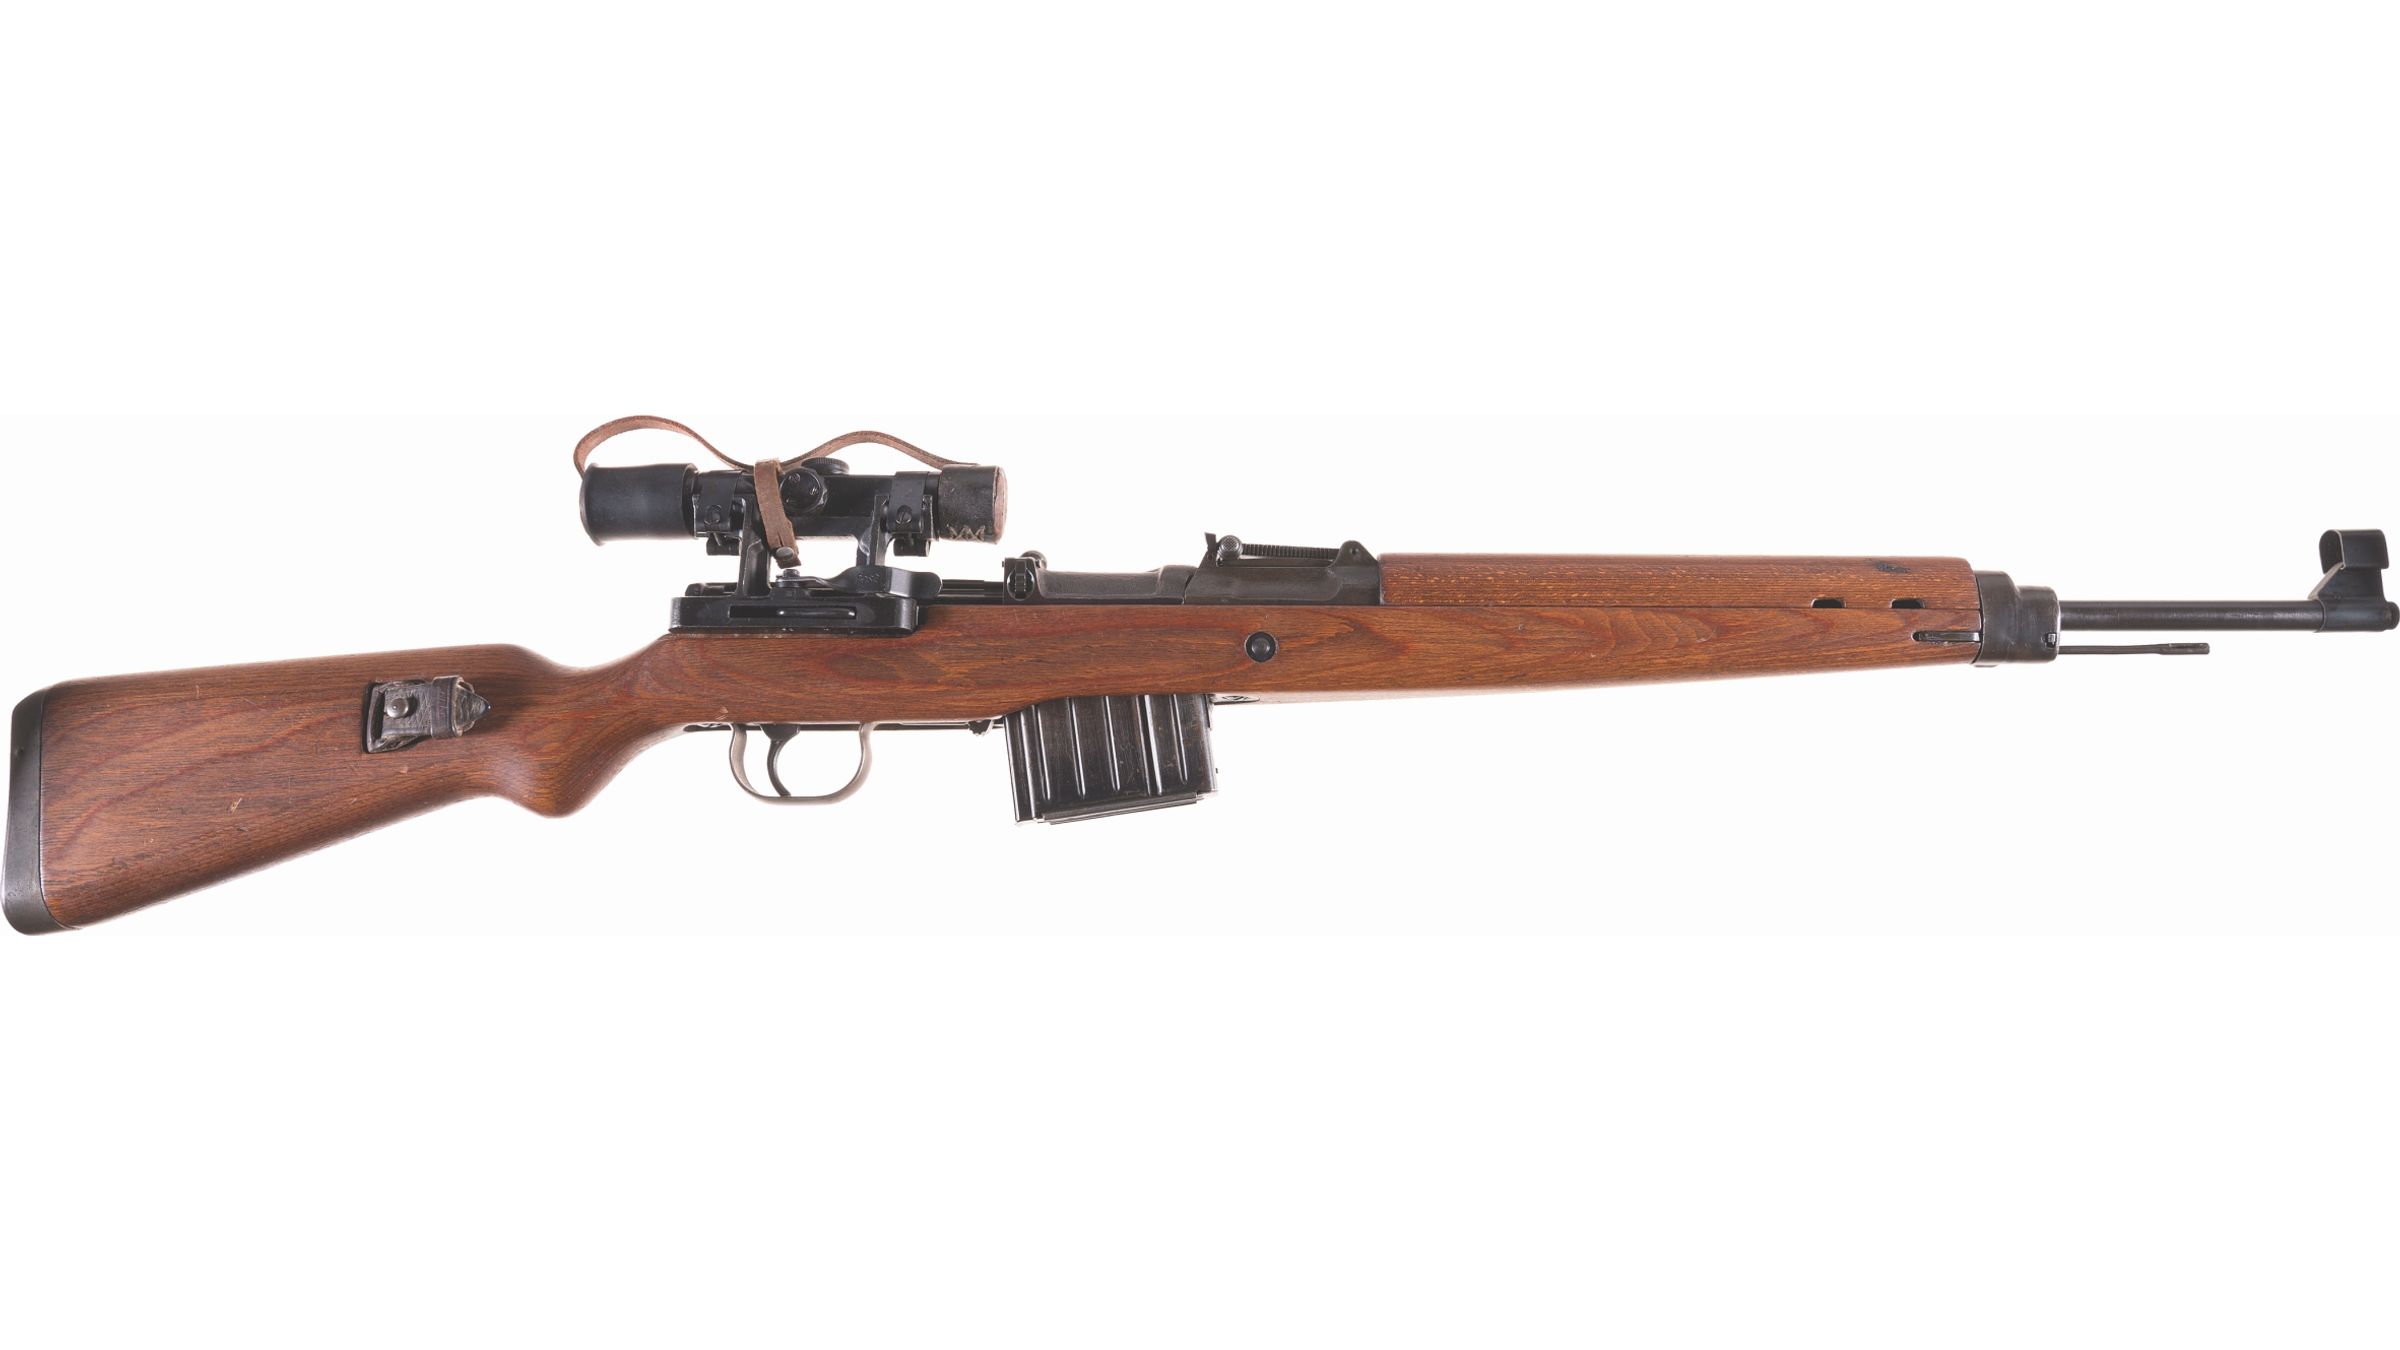 Walther ac 44 Code G43 Sniper Rifle with Scope